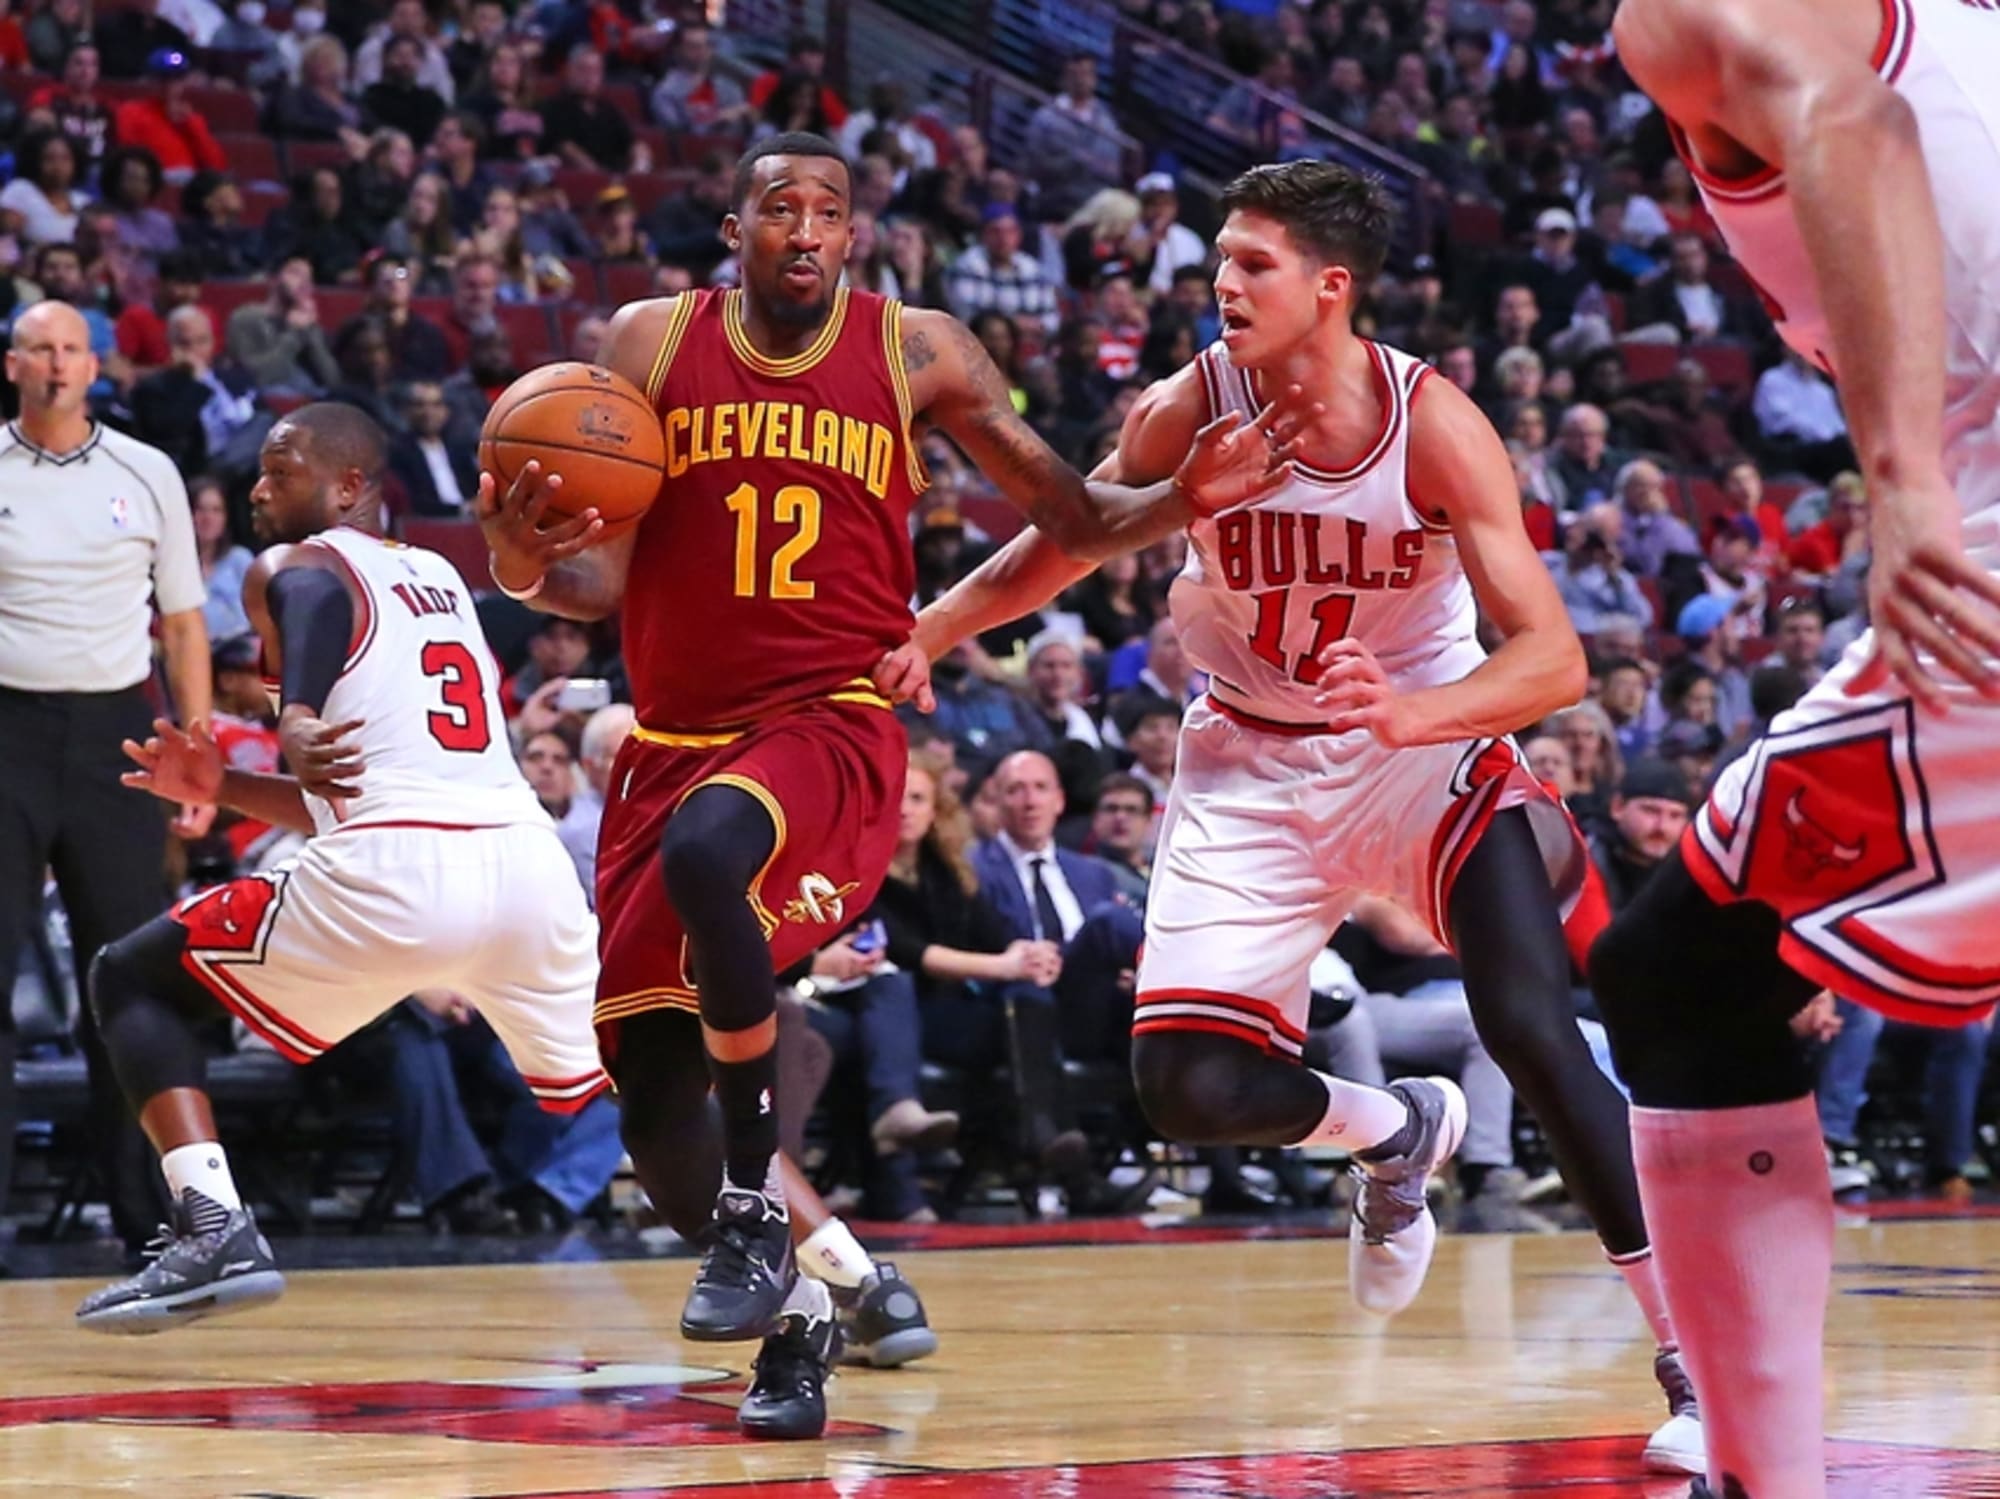 Chicago Bulls vs. Cleveland Cavaliers: How to watch